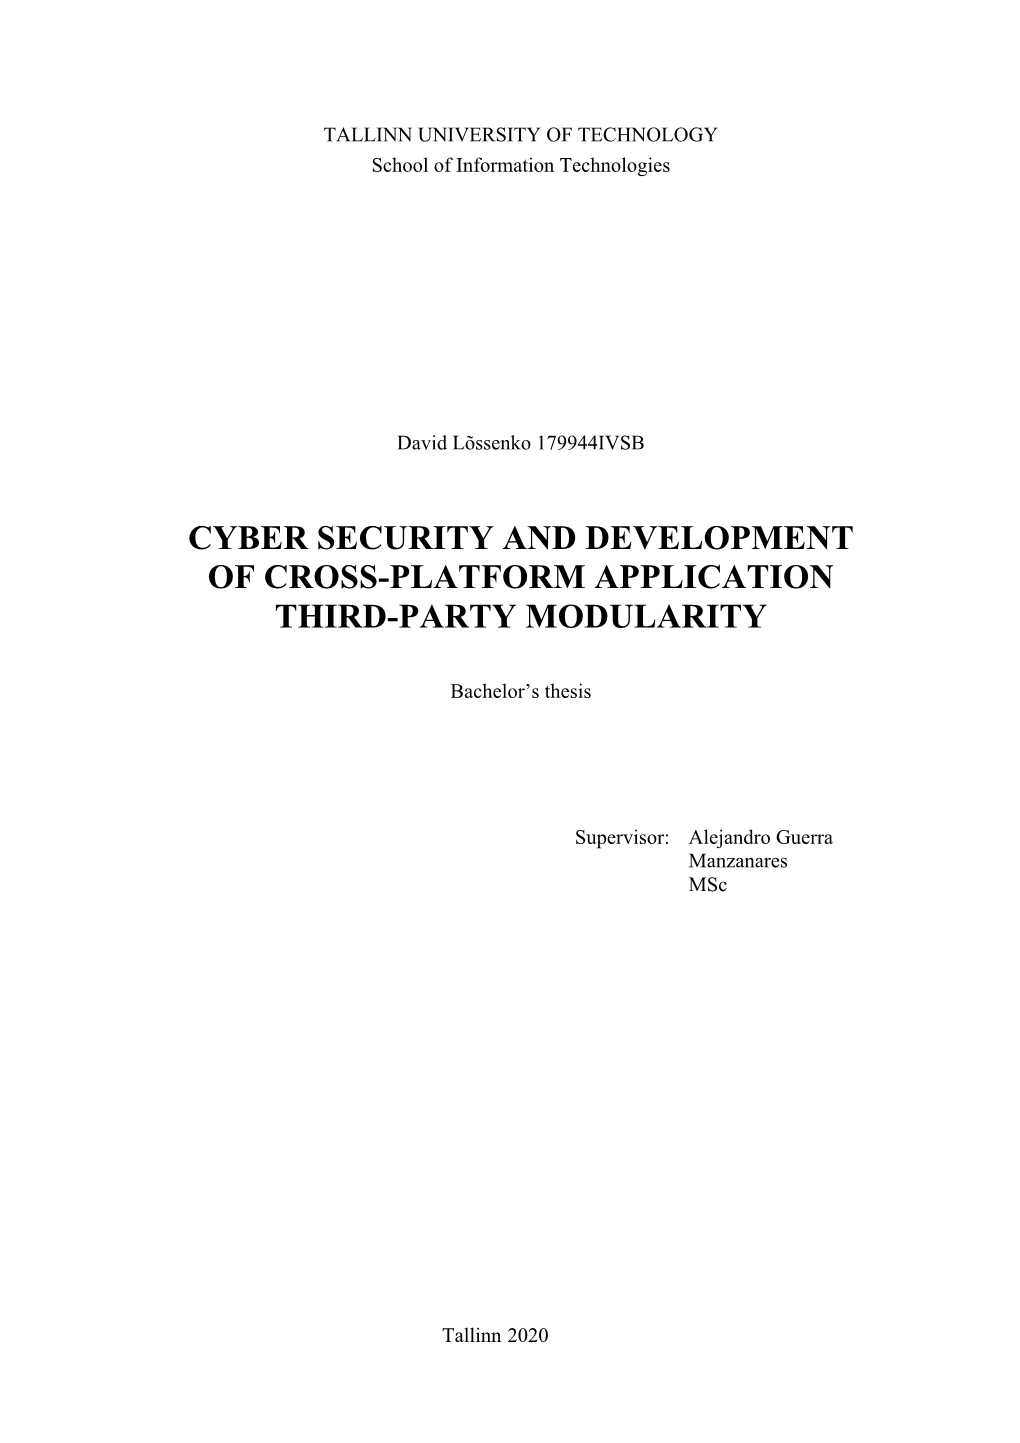 Cyber Security and Development of Cross-Platform Application Third-Party Modularity